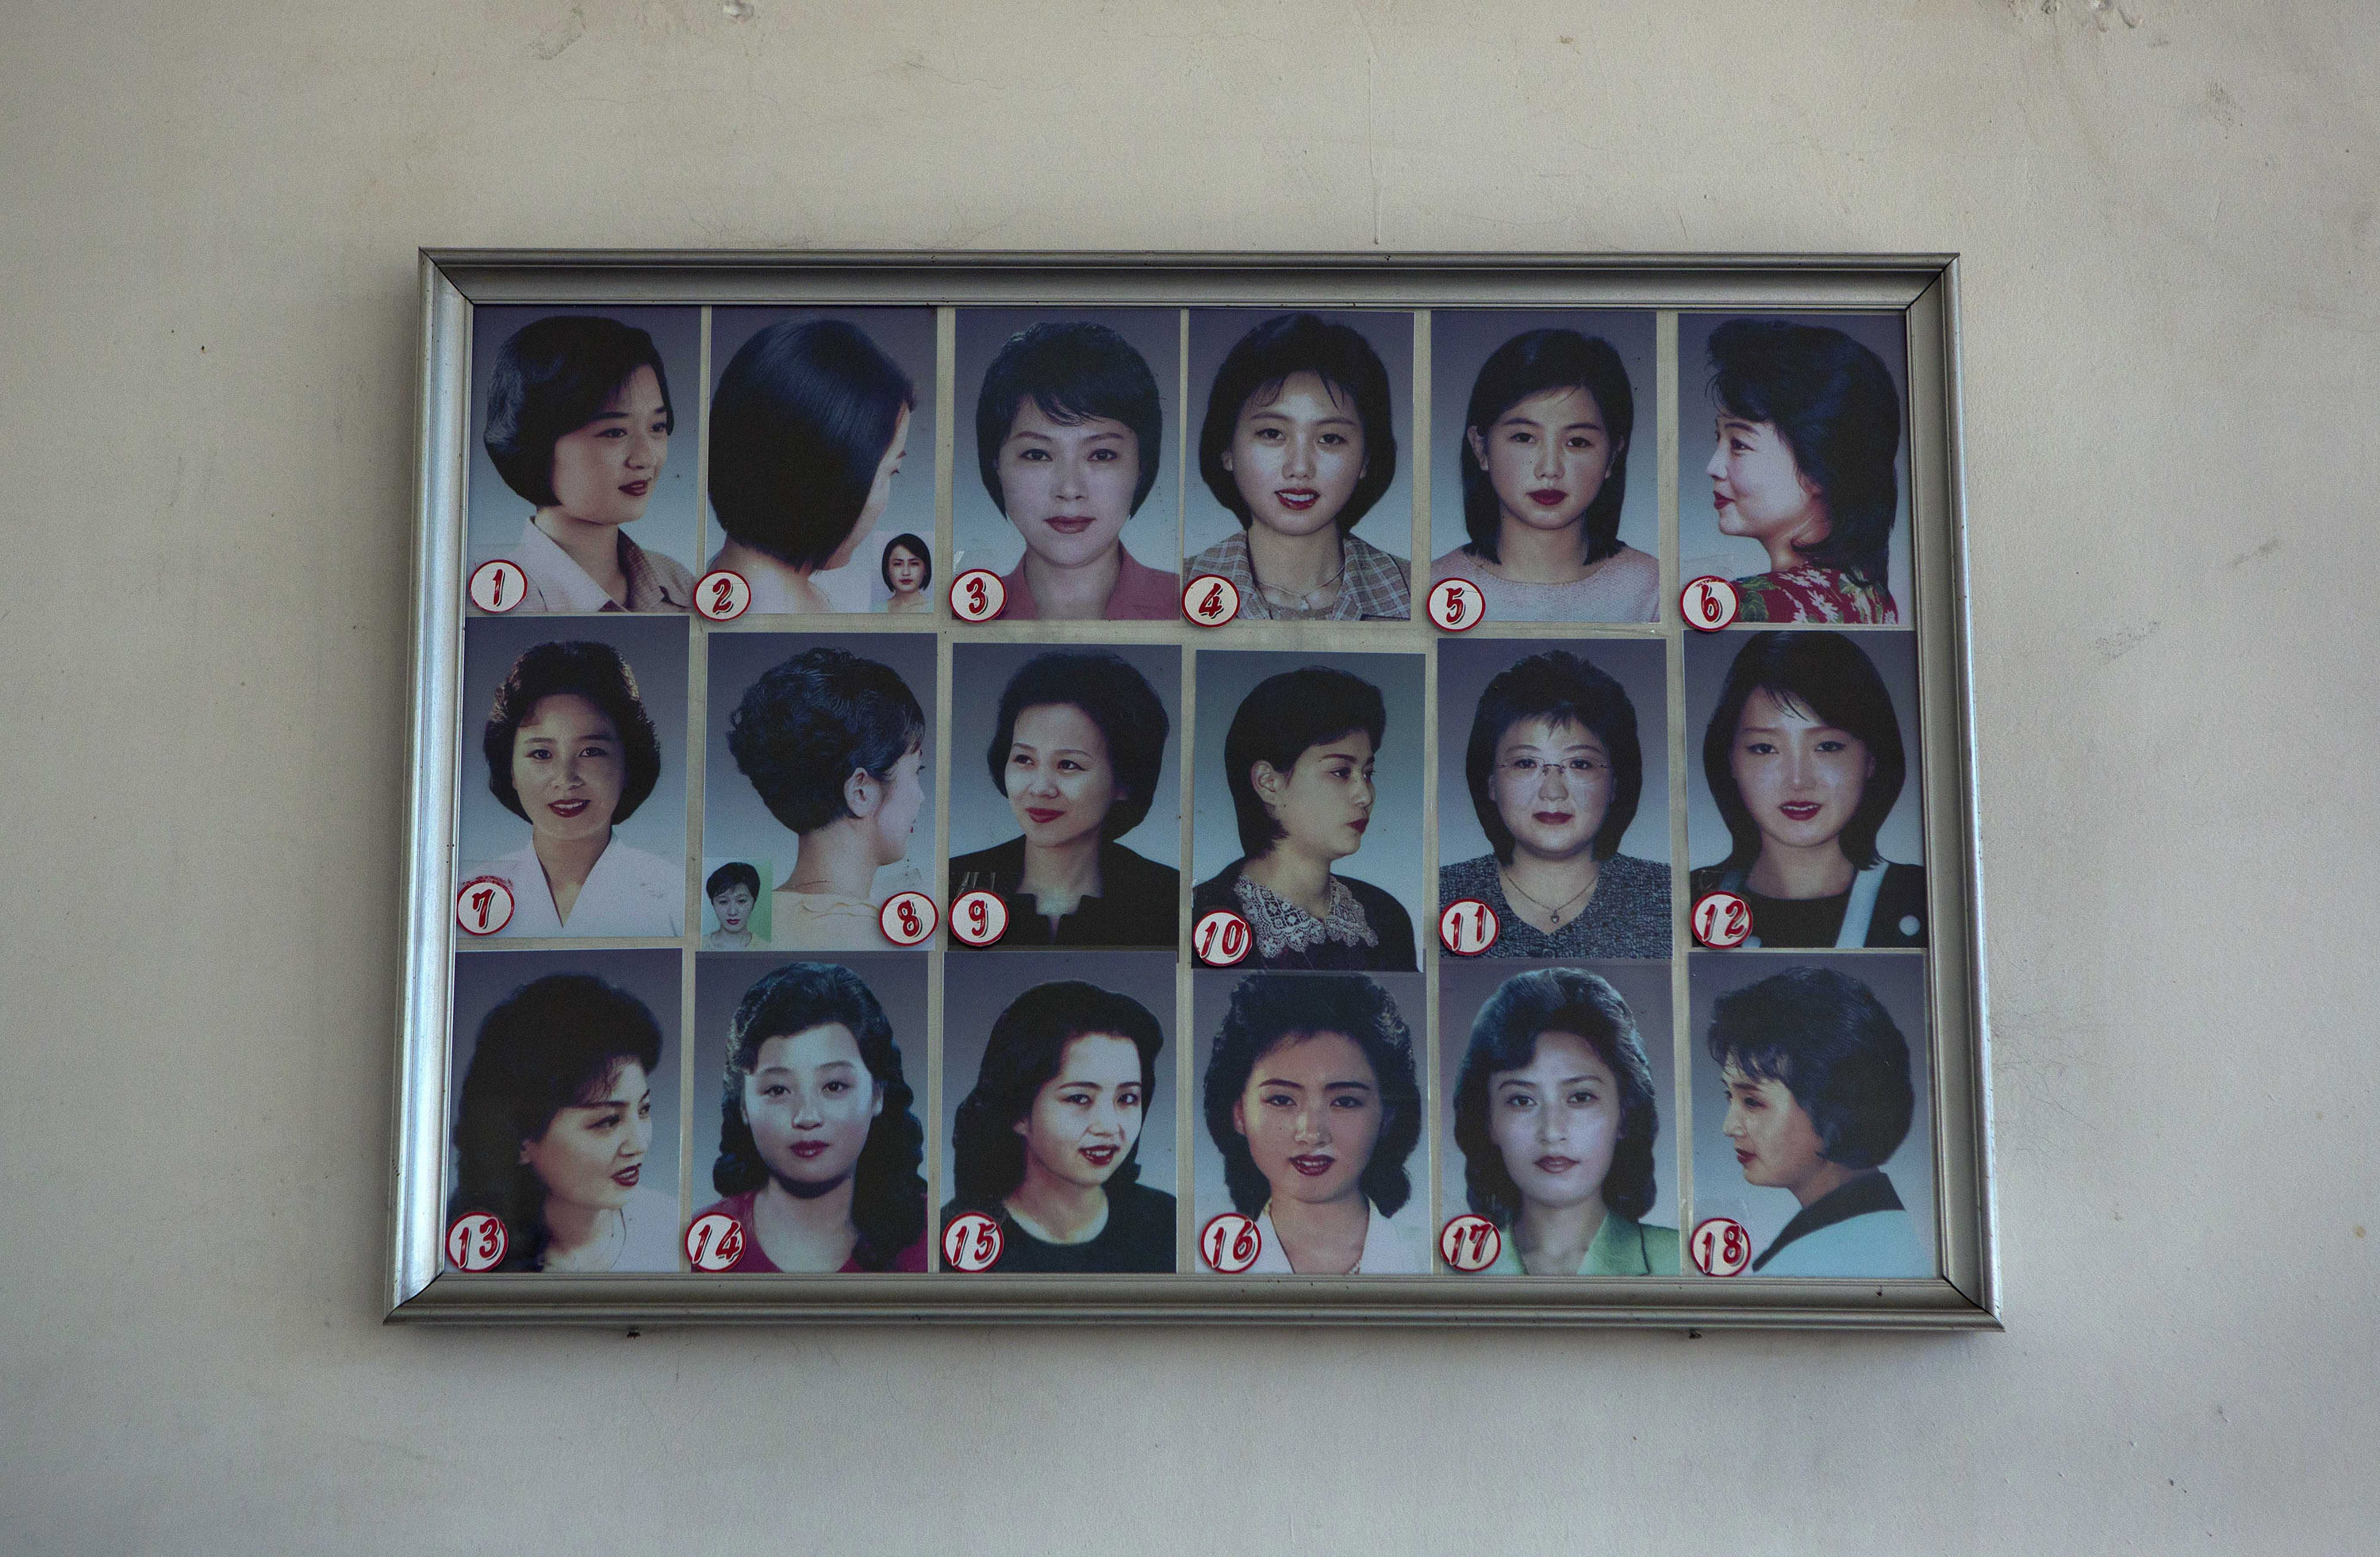 sobore on Twitter The state approved hairstyles of North Korea Nothing  else is permitted Dont even think about a mullet  httpstcoBLSL9MyOks  Twitter